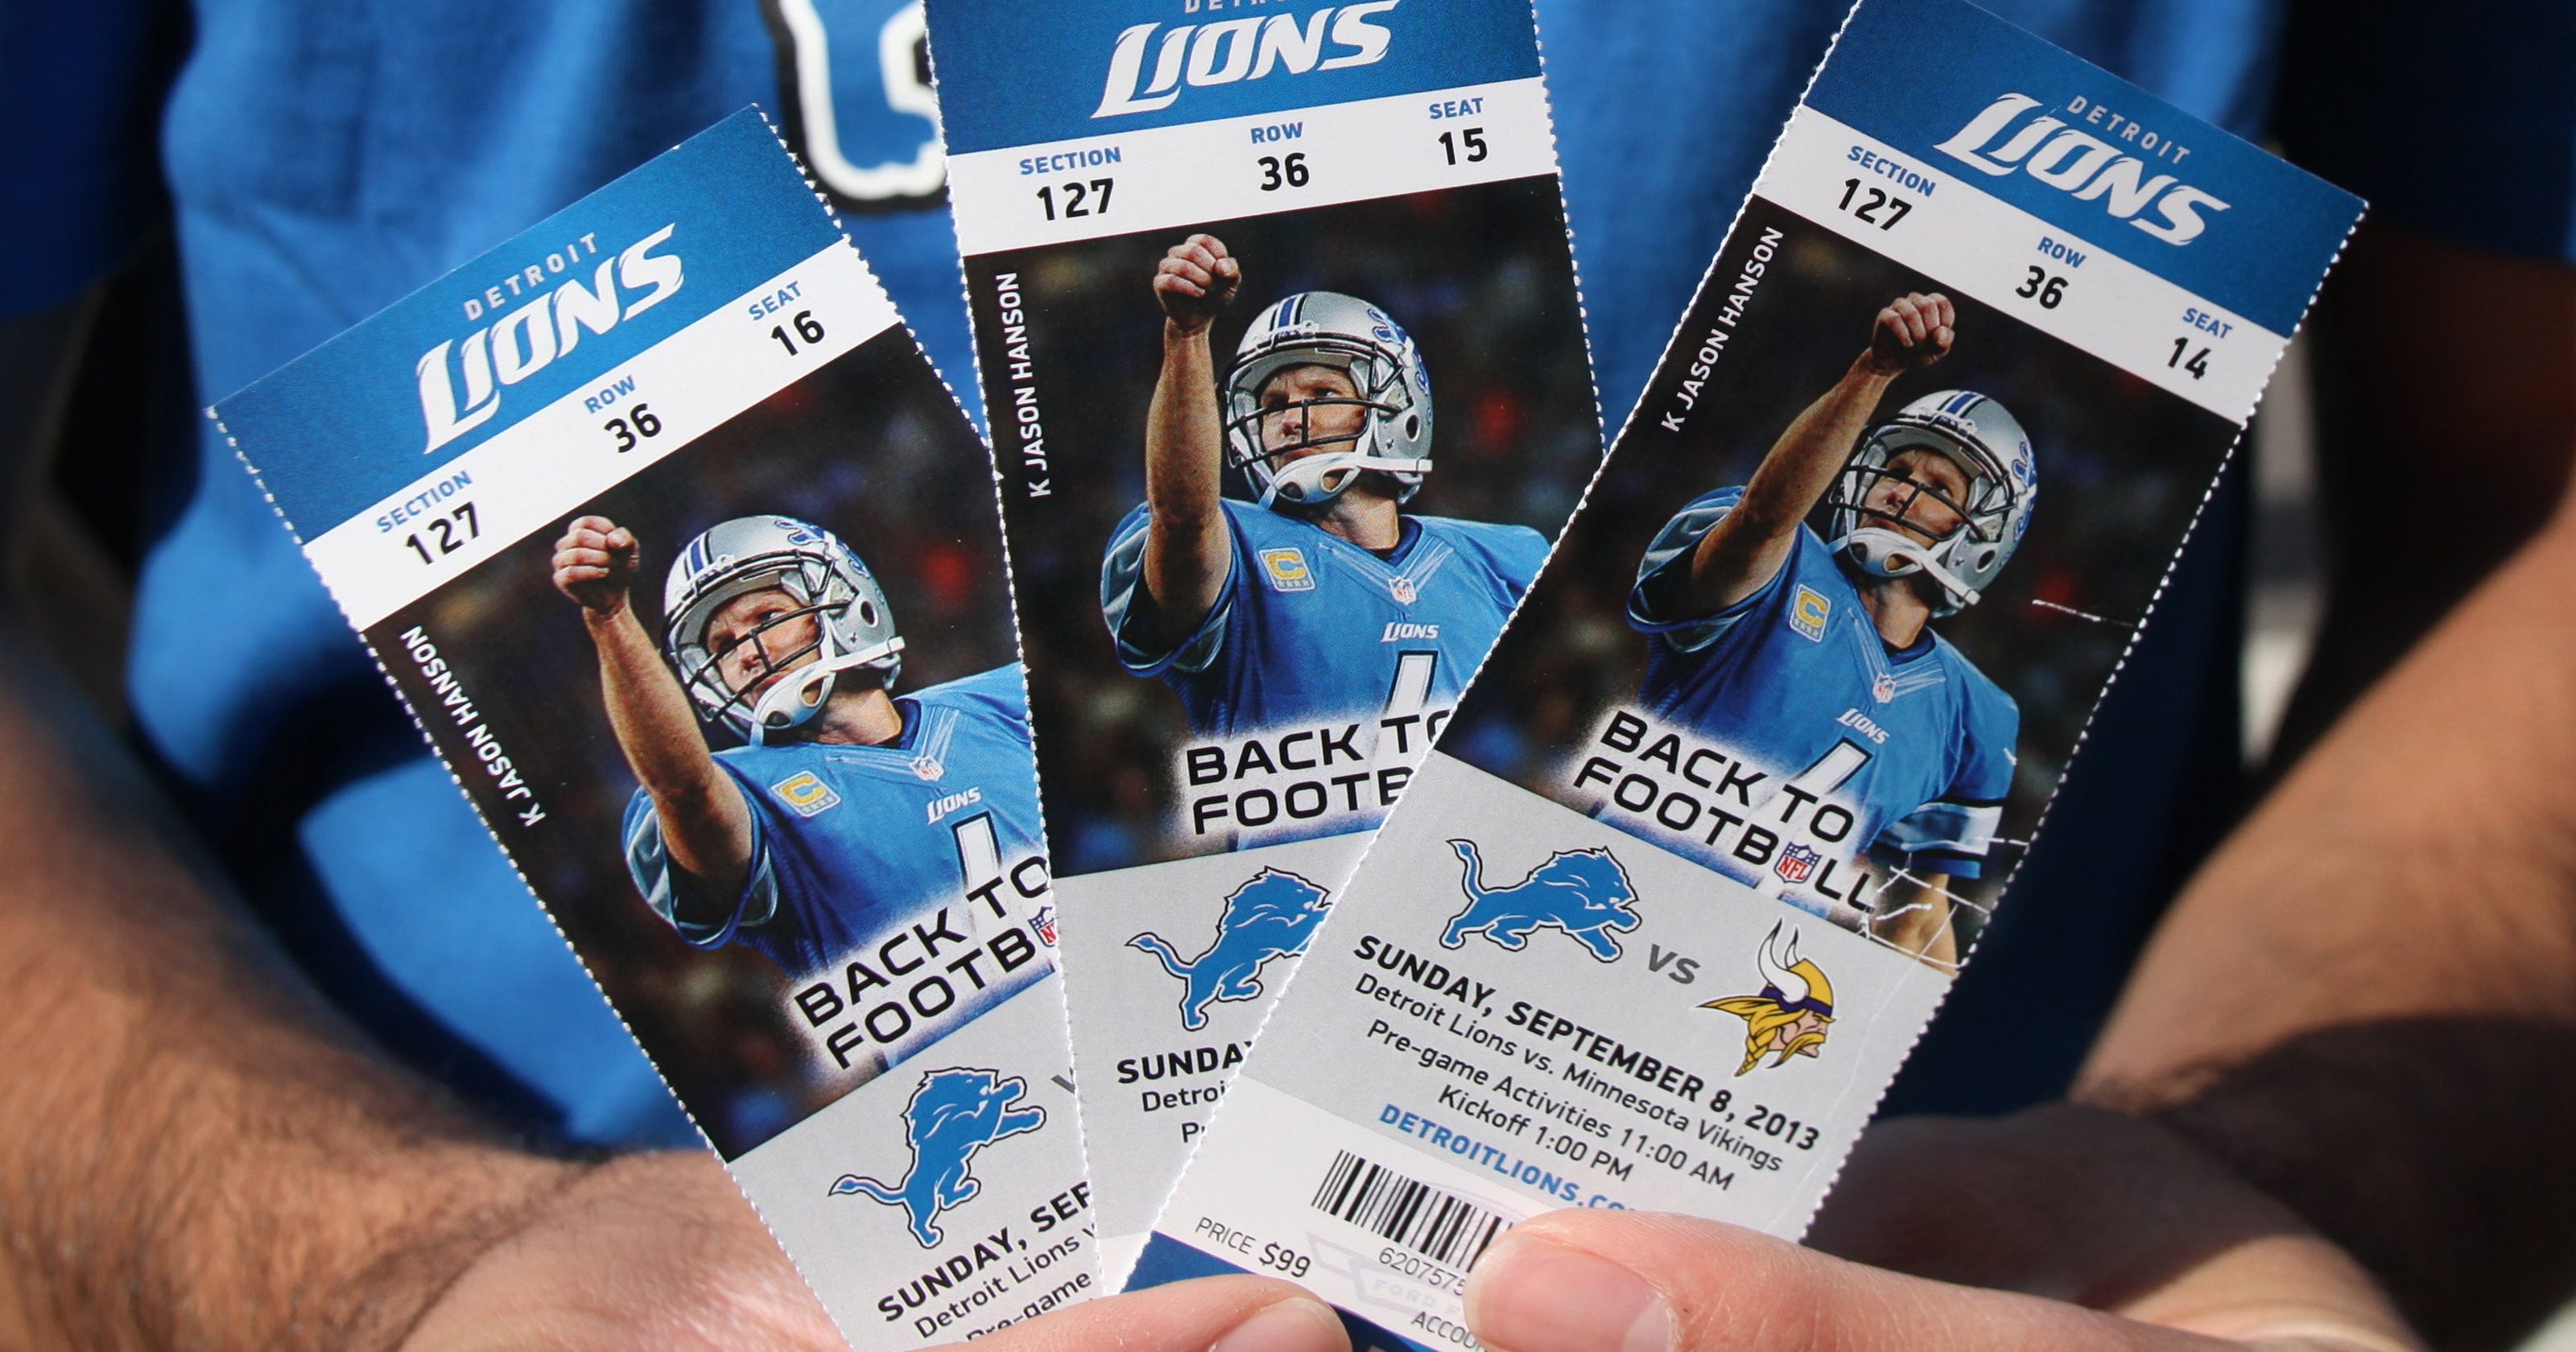 lions game ticket